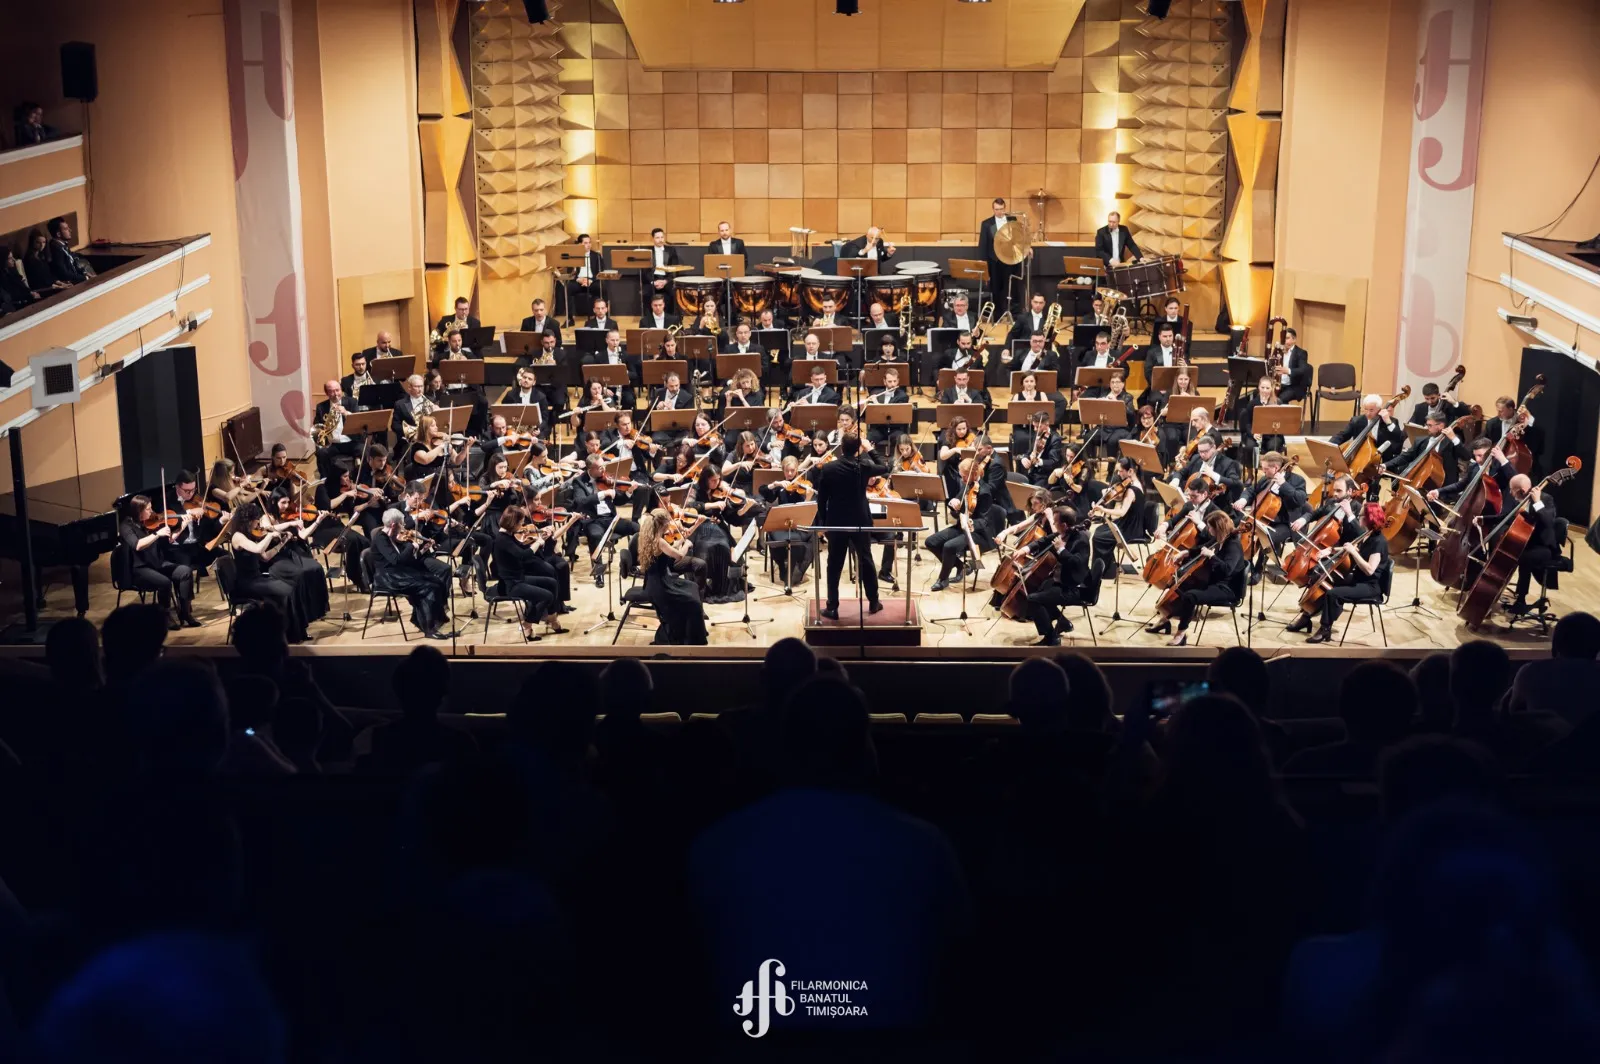 Symphonic Concert: The Banatul Philharmonic Symphony Orchestra plays SAINT-SAËNS and BEETHOVEN